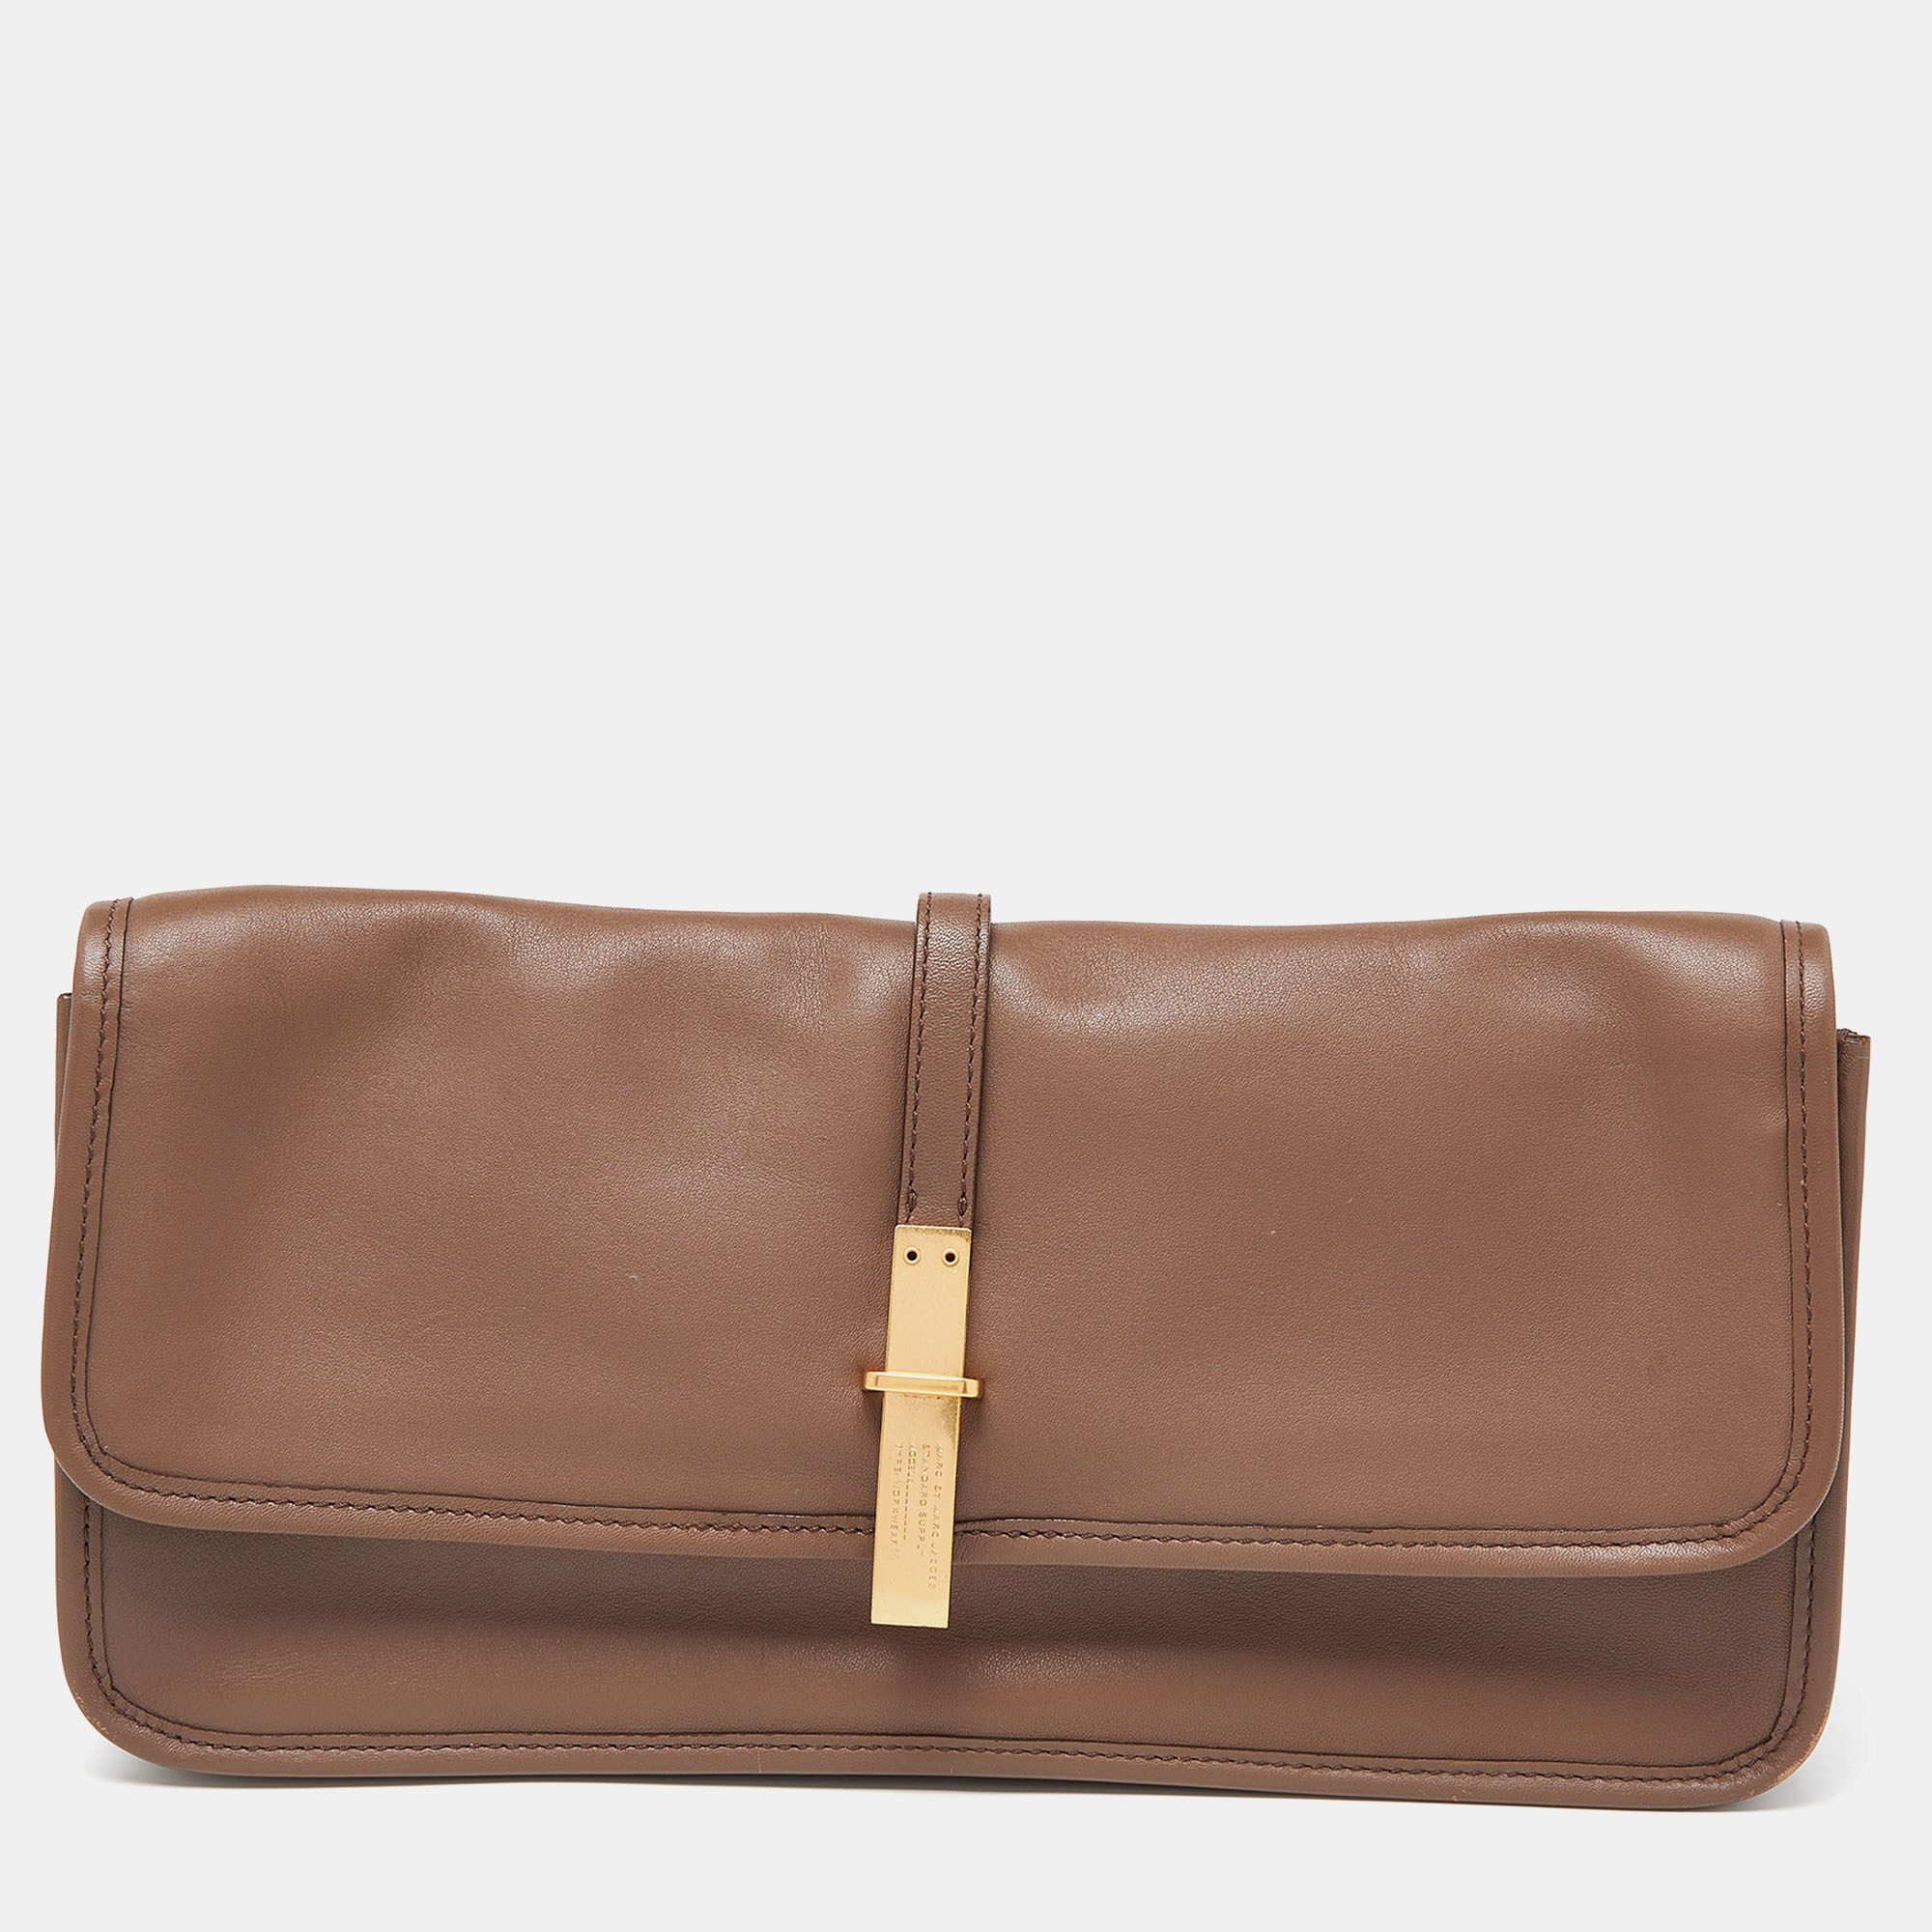 Pre-owned Marc By Marc Jacobs Beige Leather Metal Flap Clutch